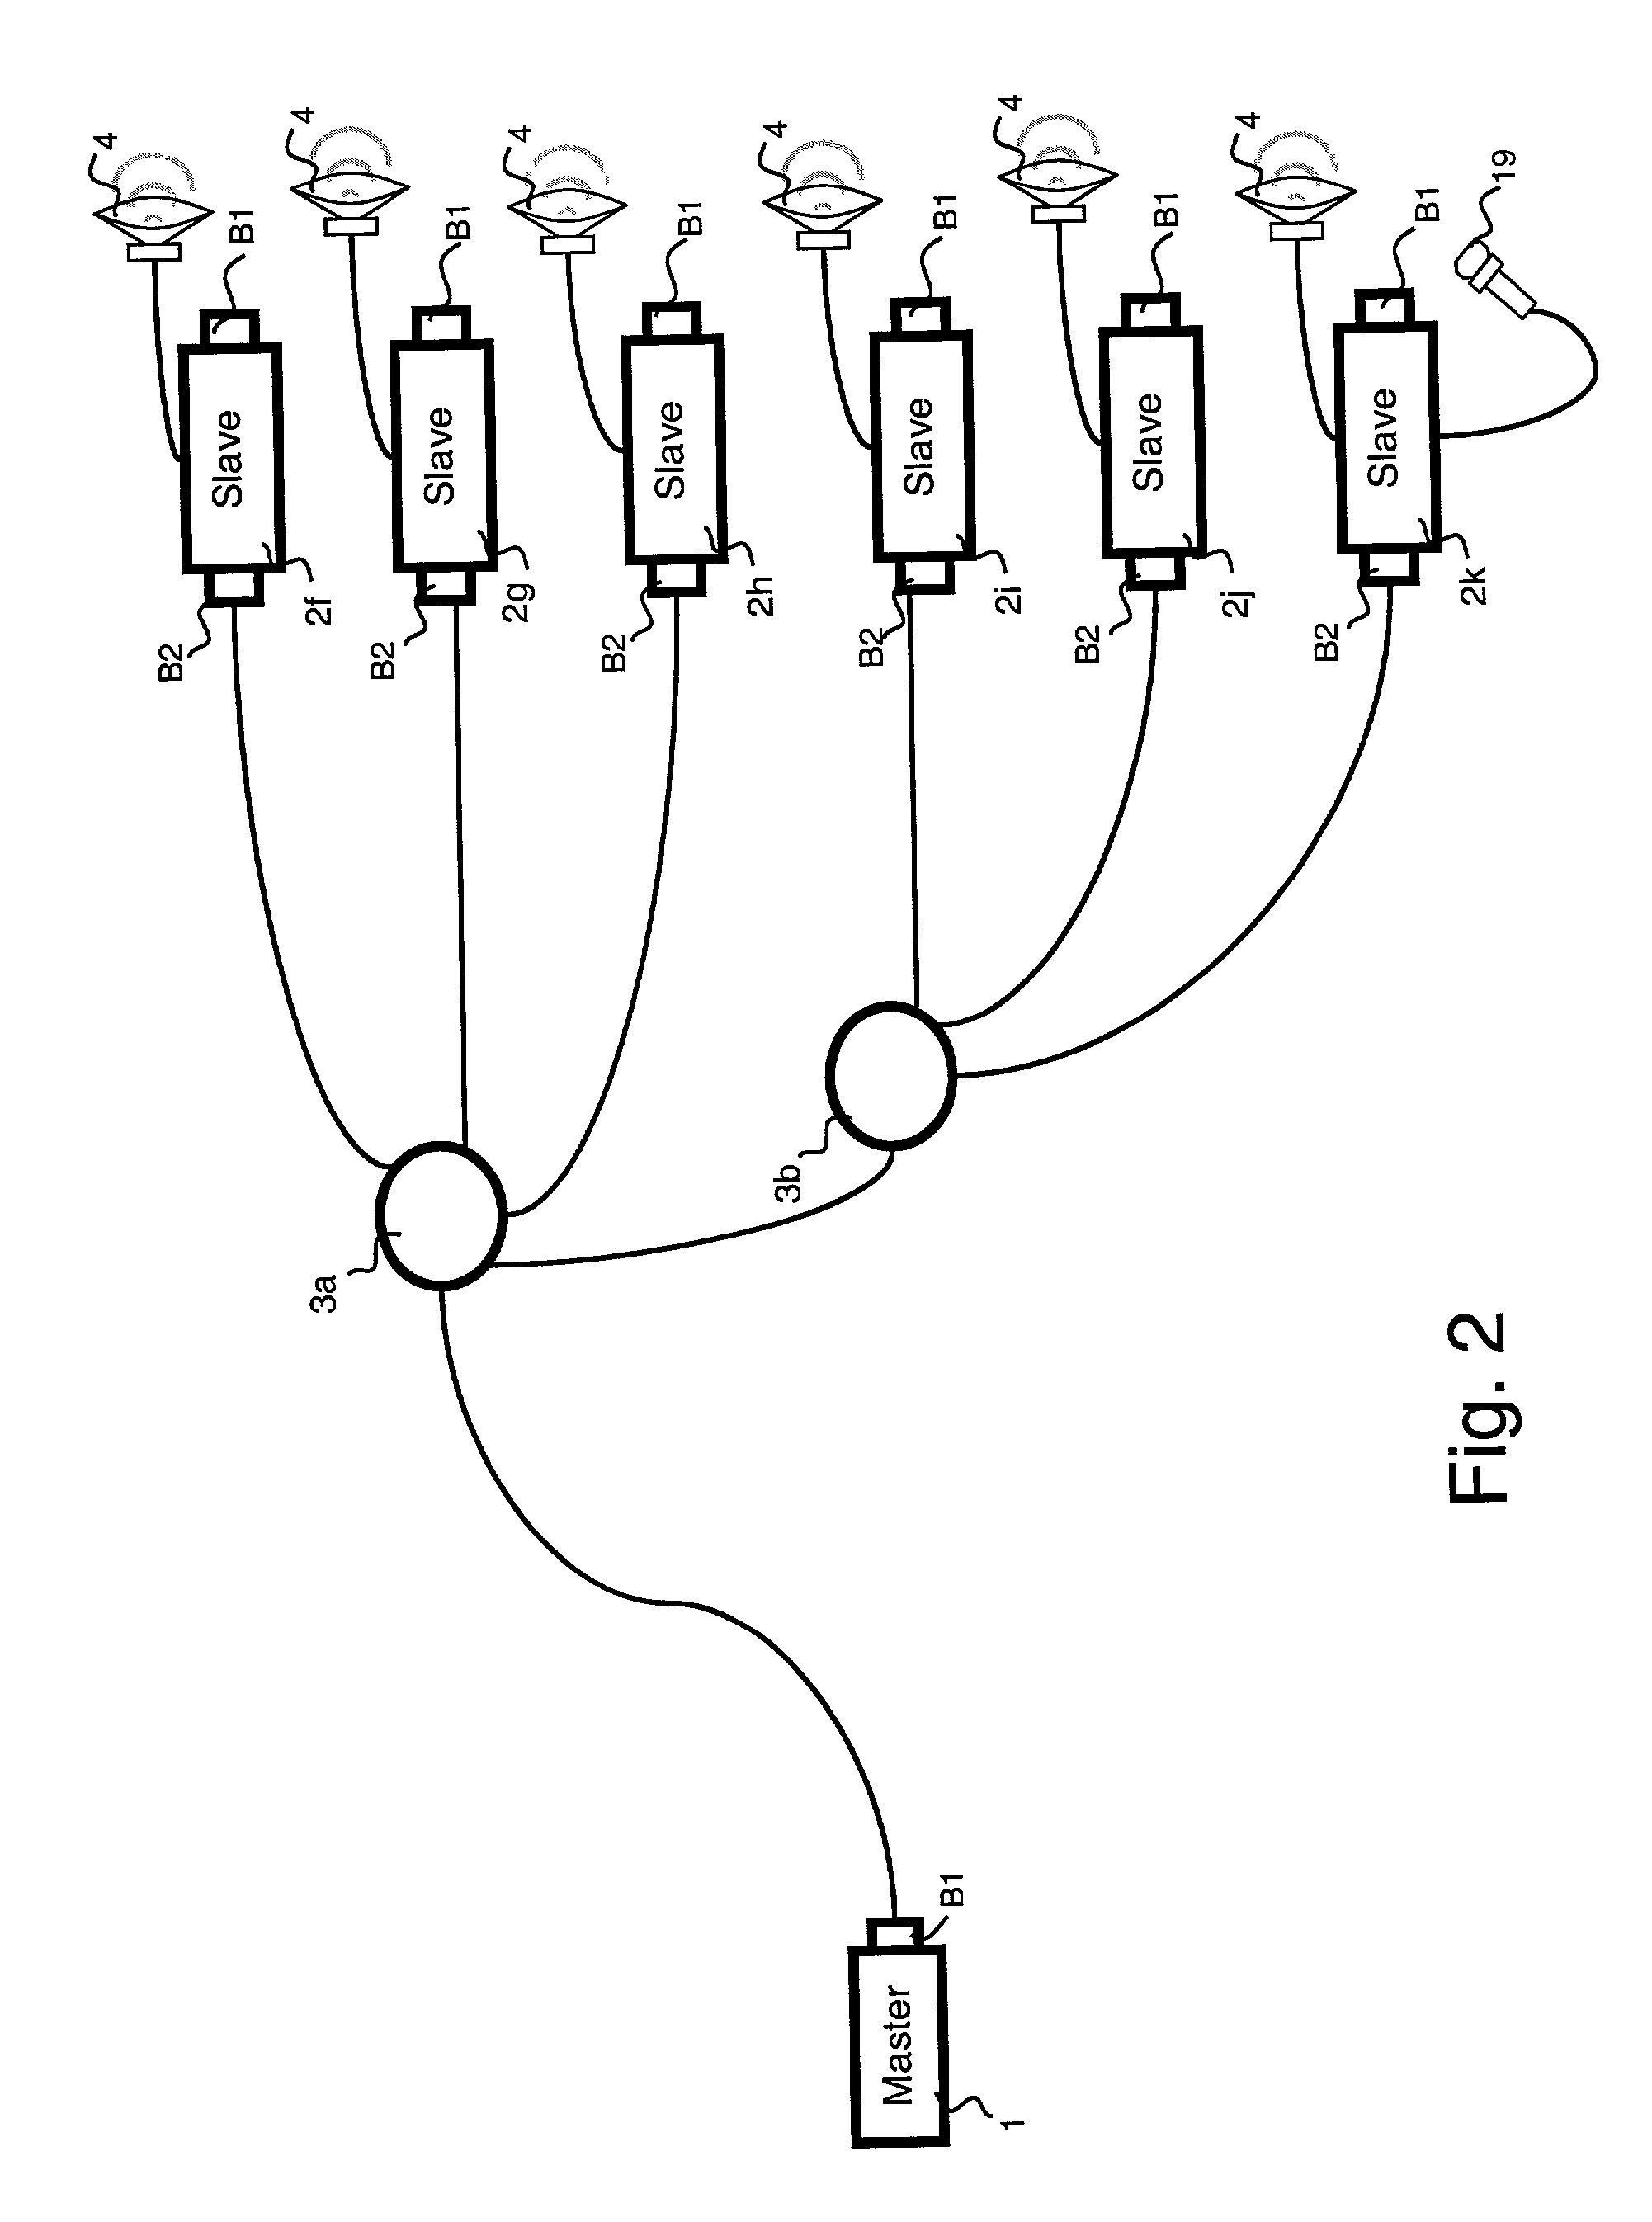 Audio data transmission system between a master module and slave modules by means of a digital communication network